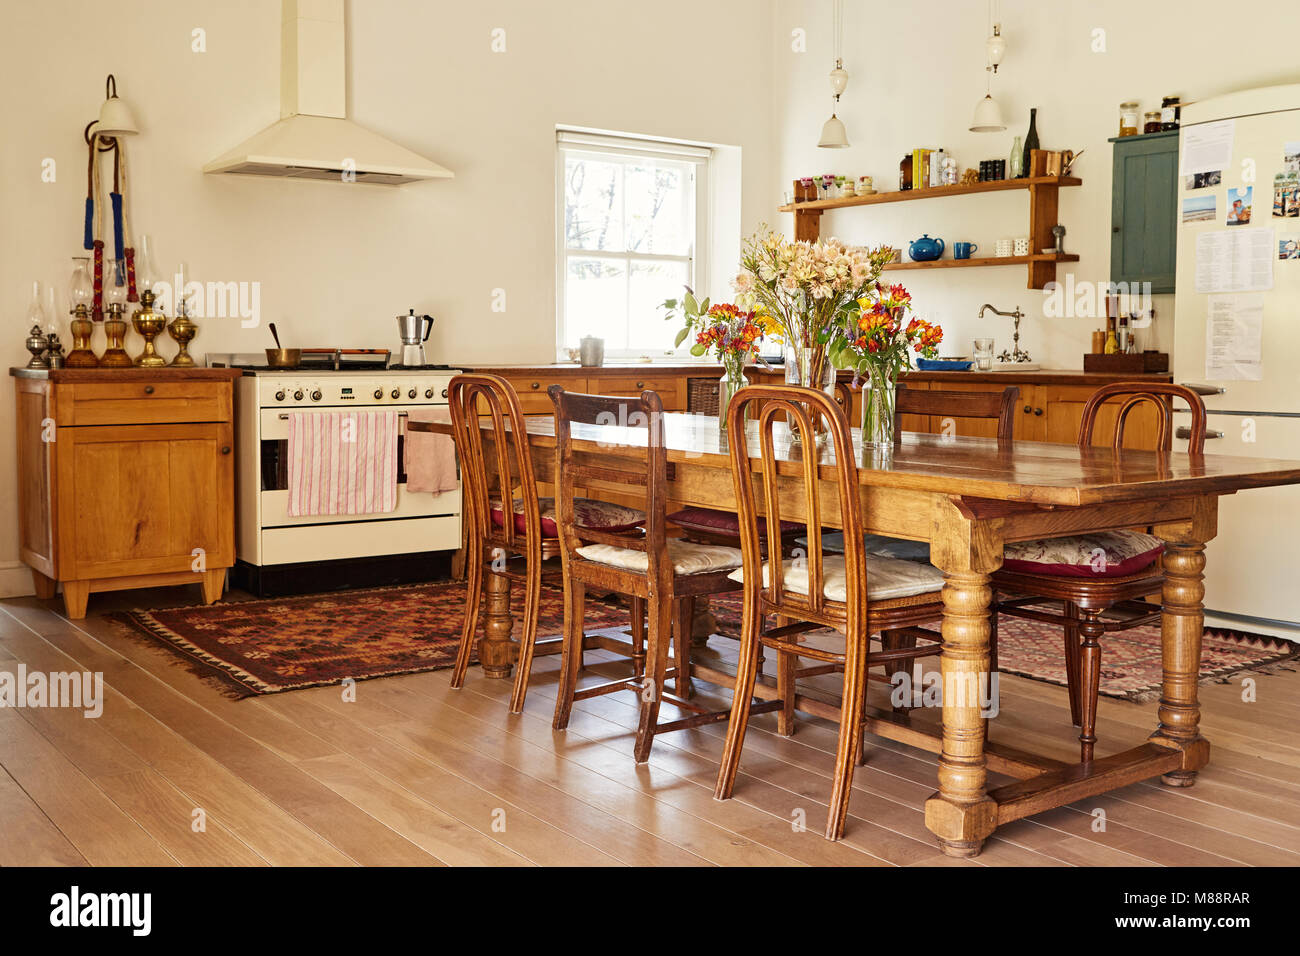 Interior of the country style kitchen and dining table in a large residential home Stock Photo